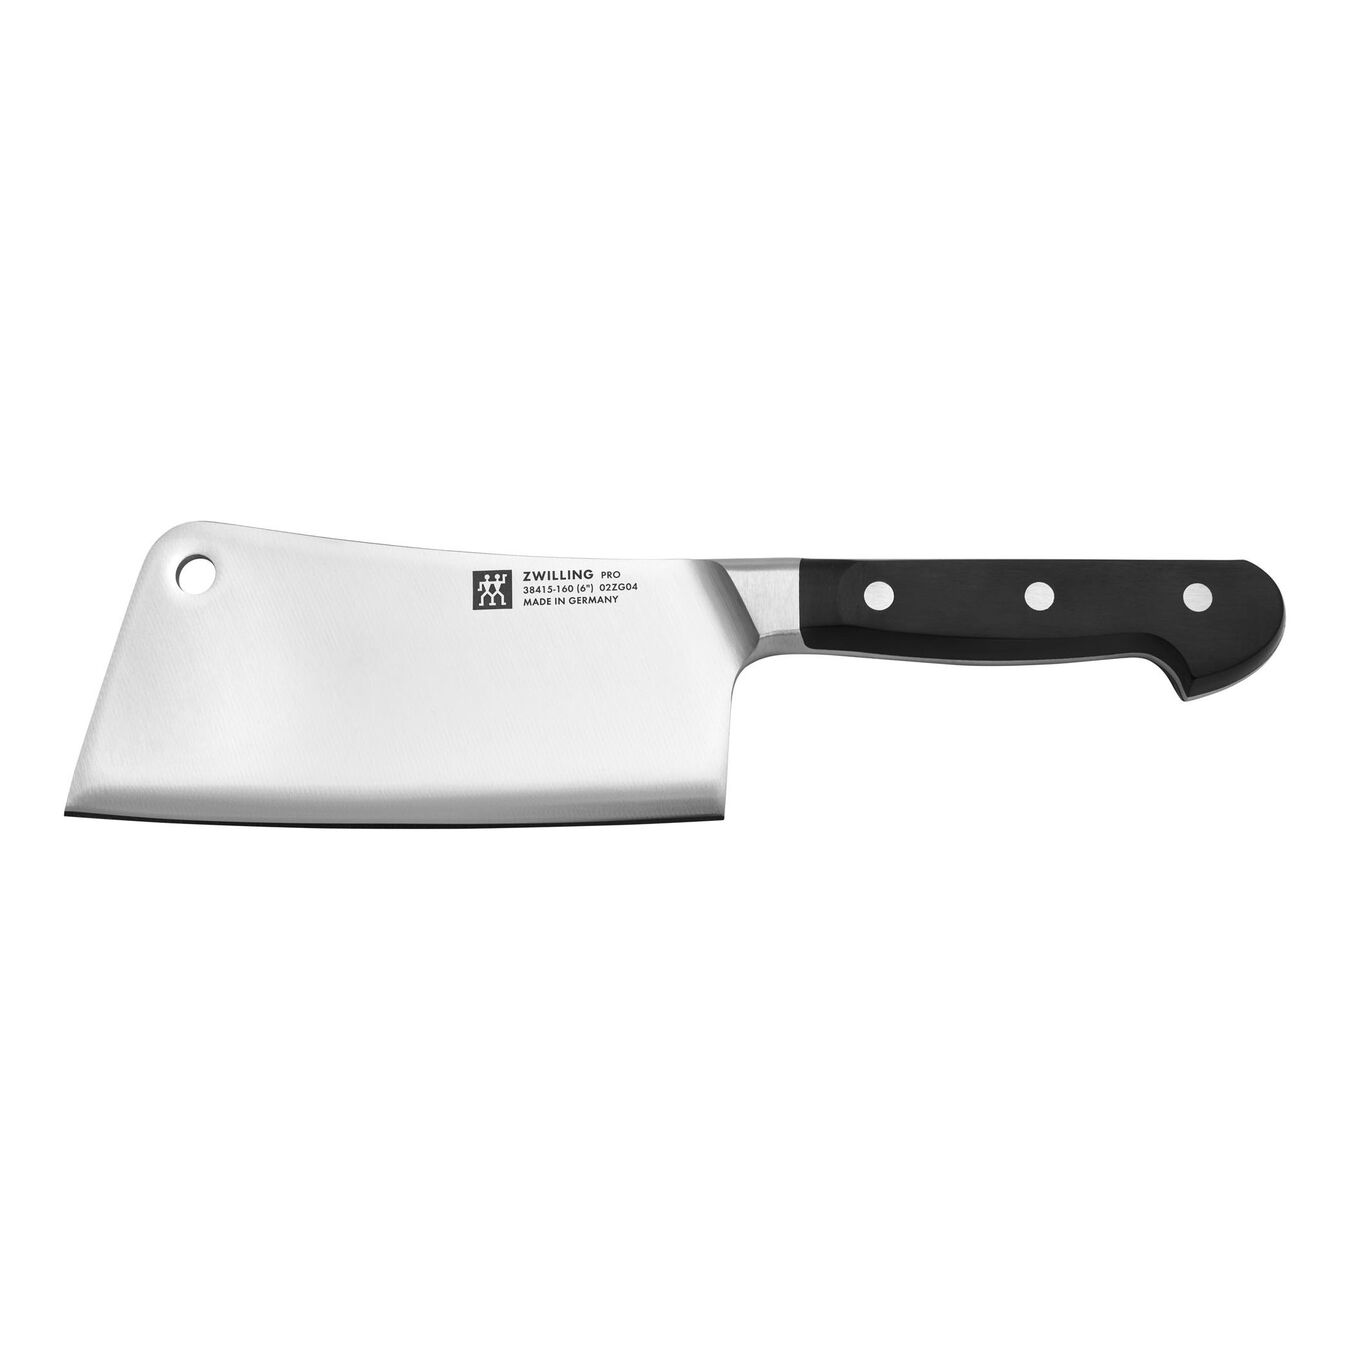 6.5 inch Cleaver - Visual Imperfections,,large 2